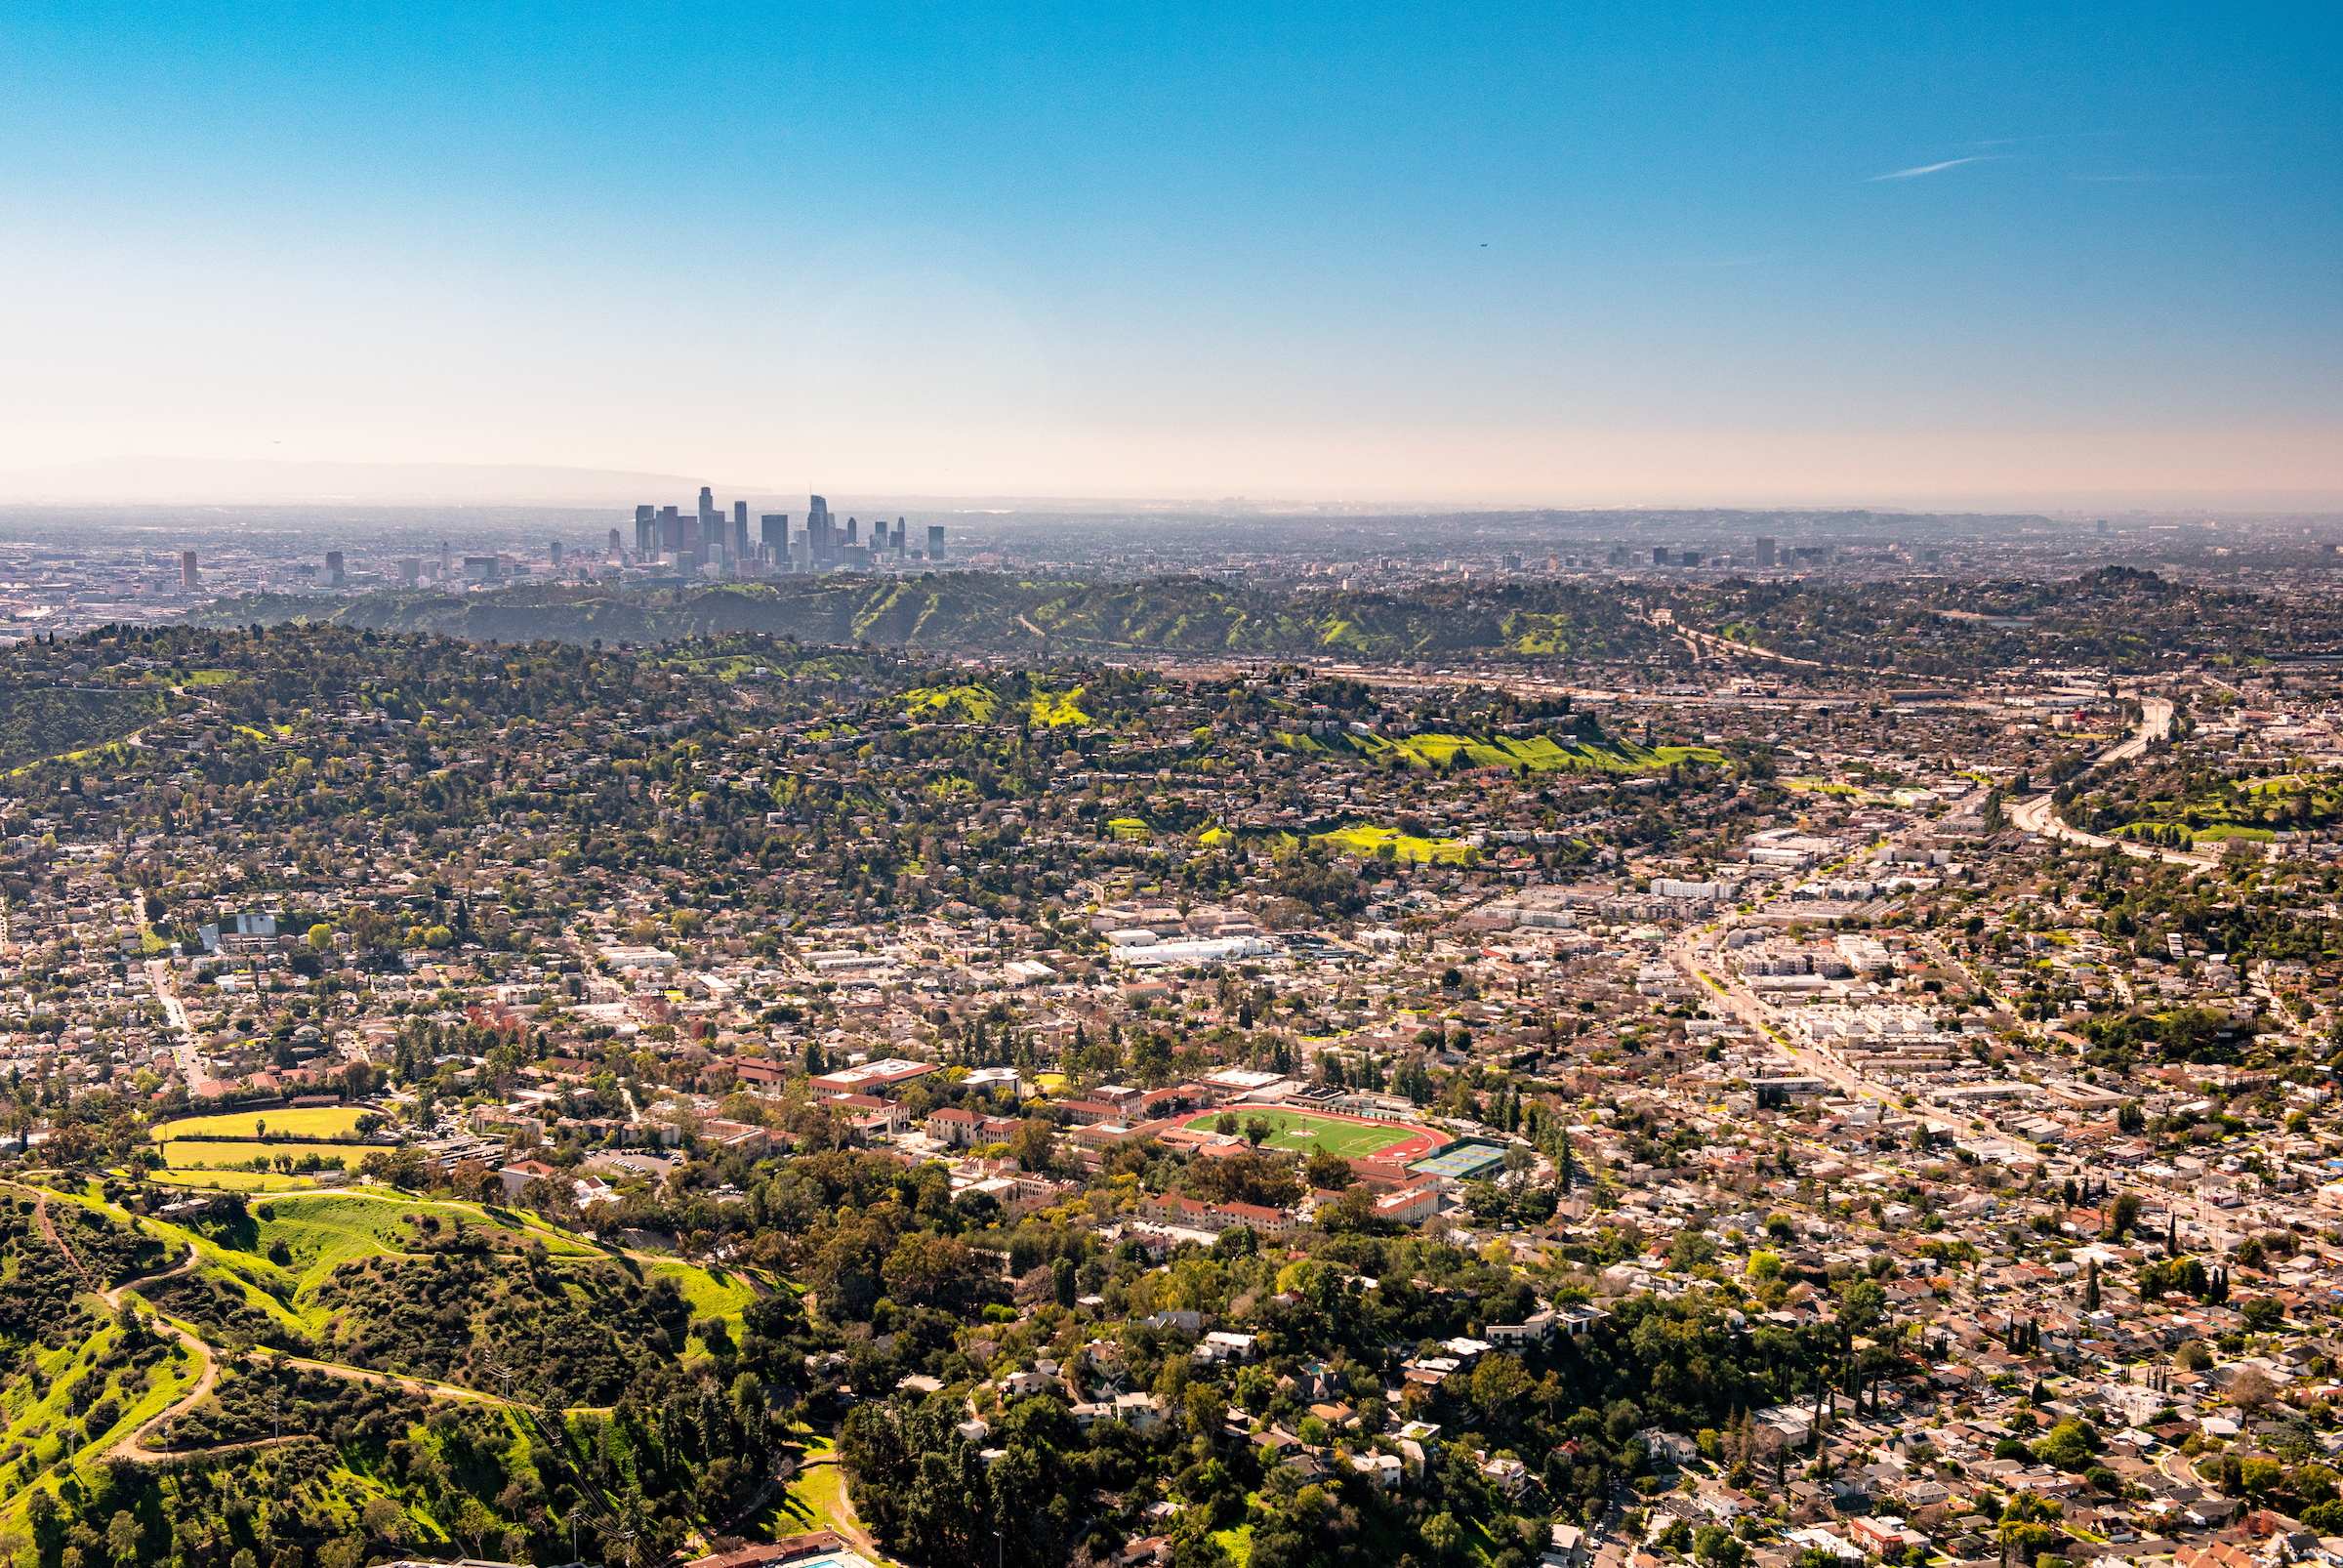 A view of campus from a drone with downtown LA in the background